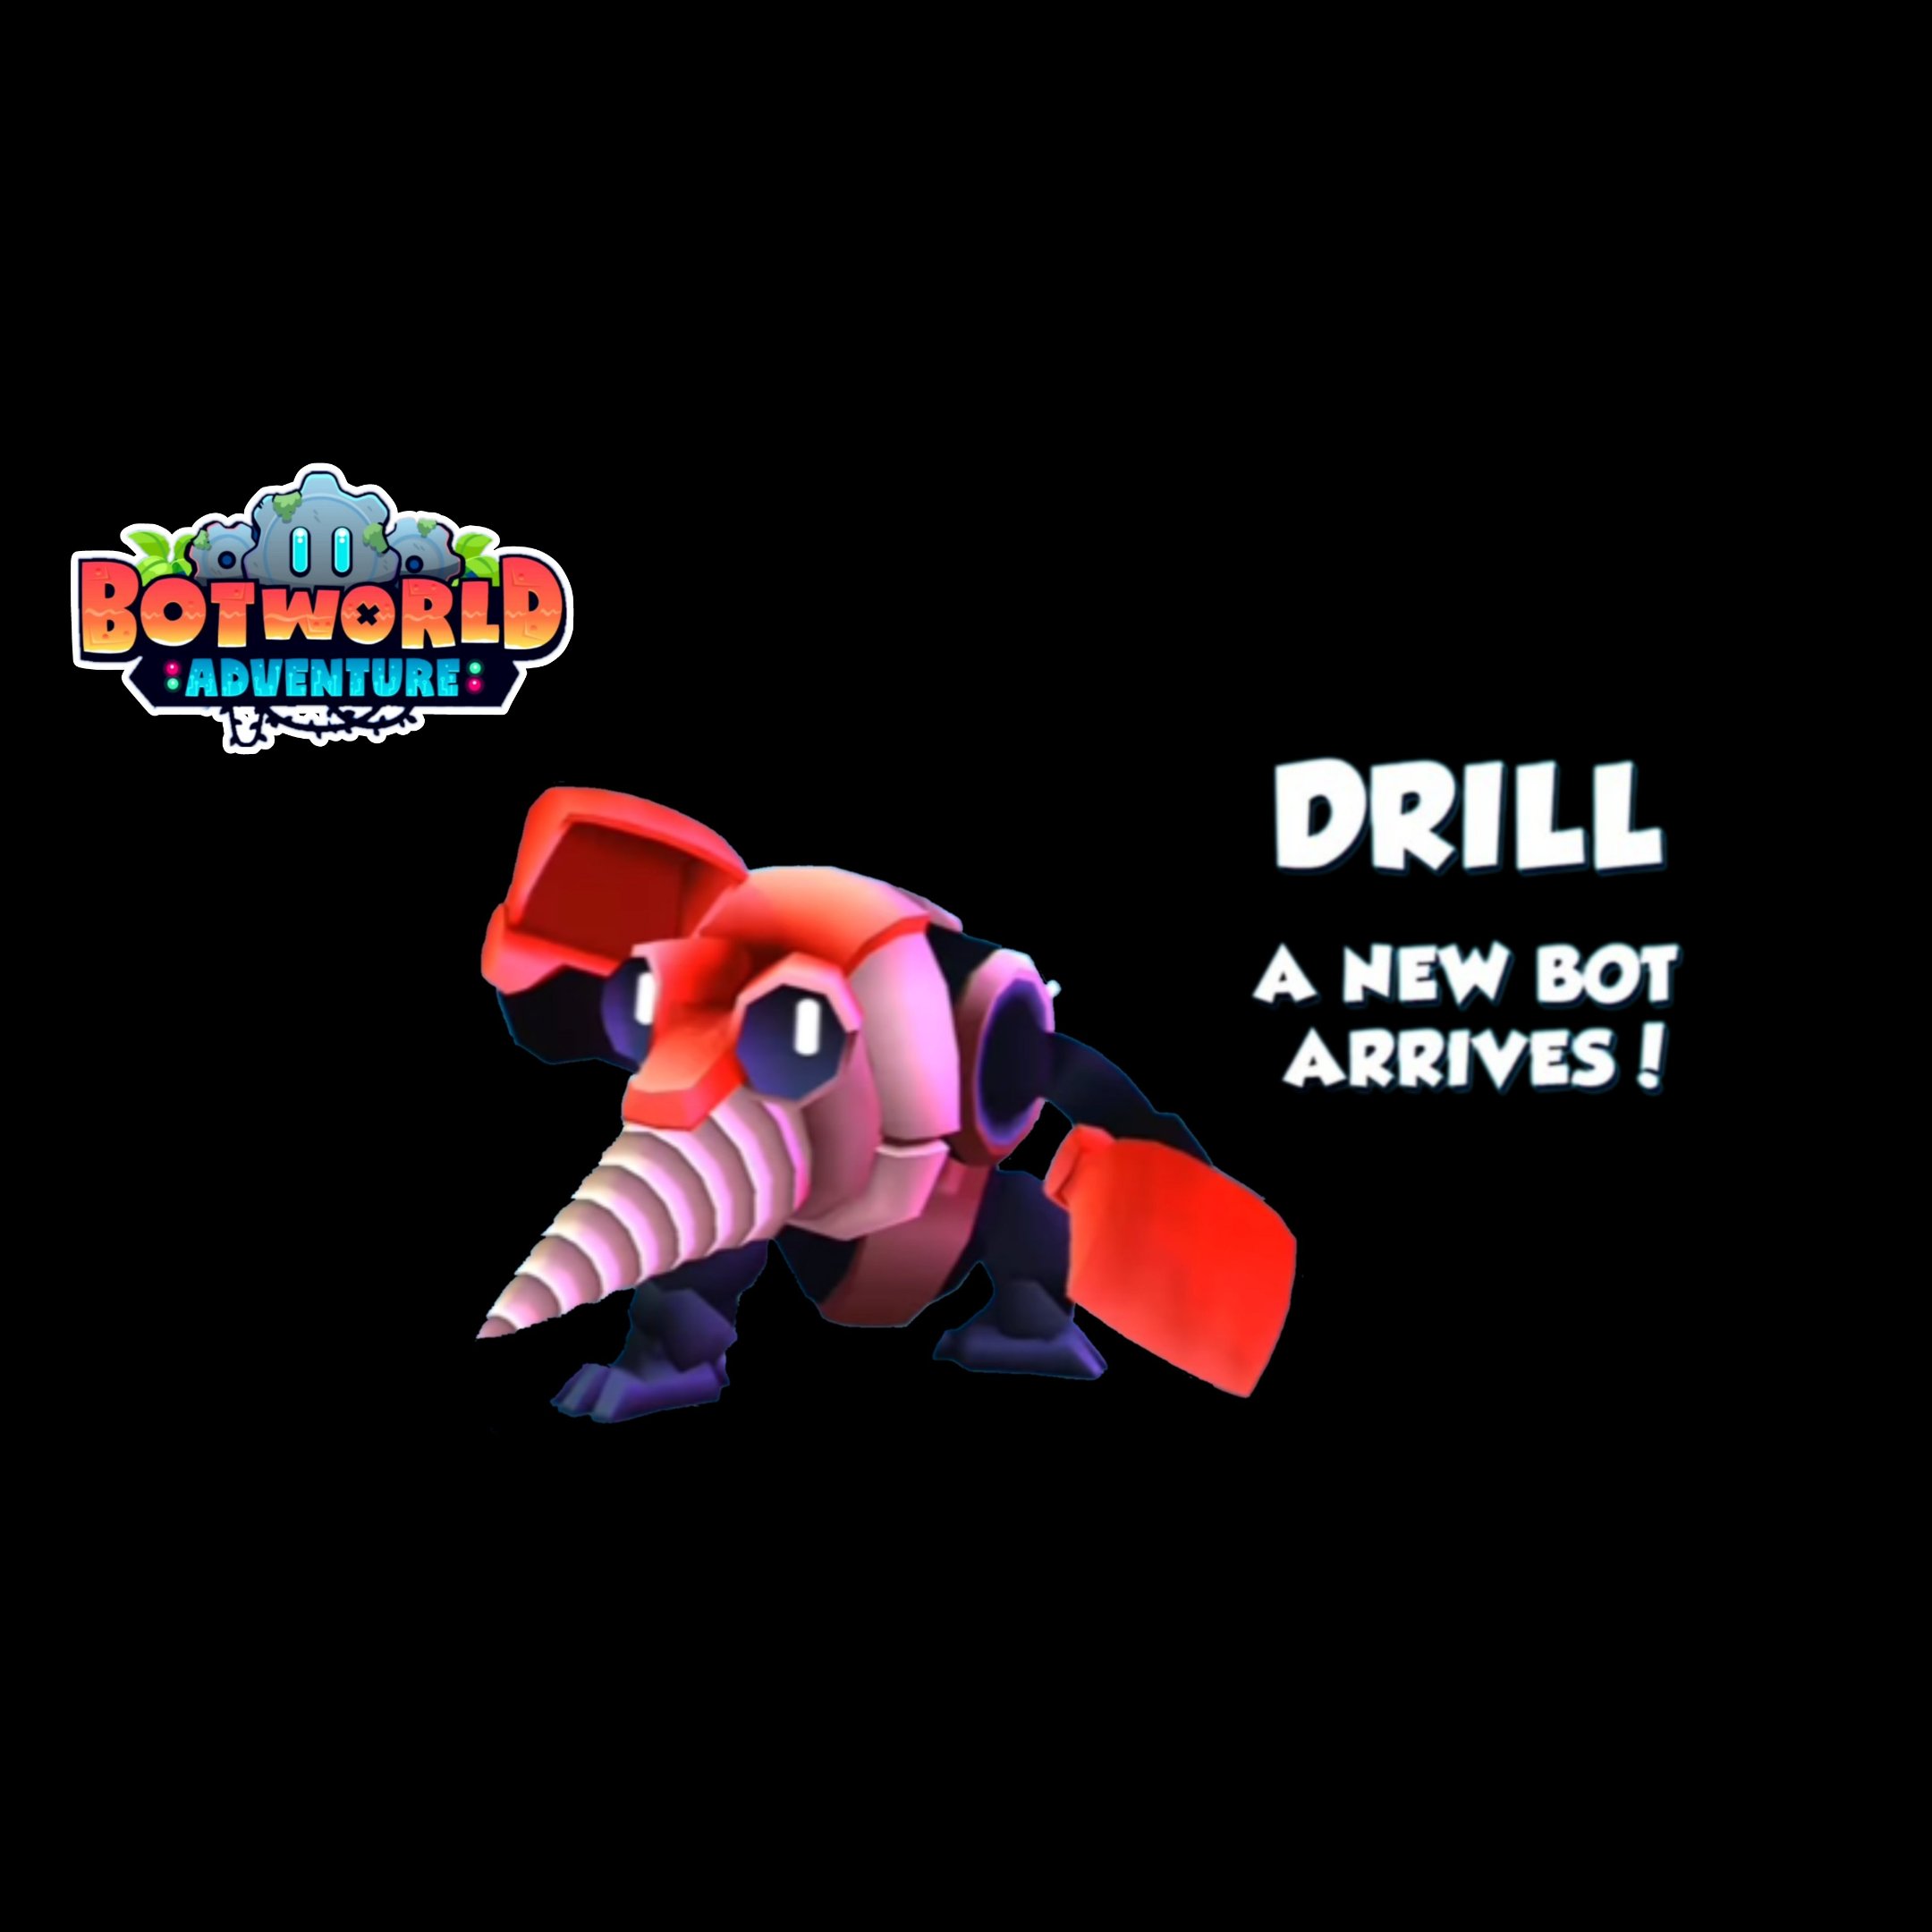 New BOT DRILL coming soon... BOTWORLD ADVENTURE